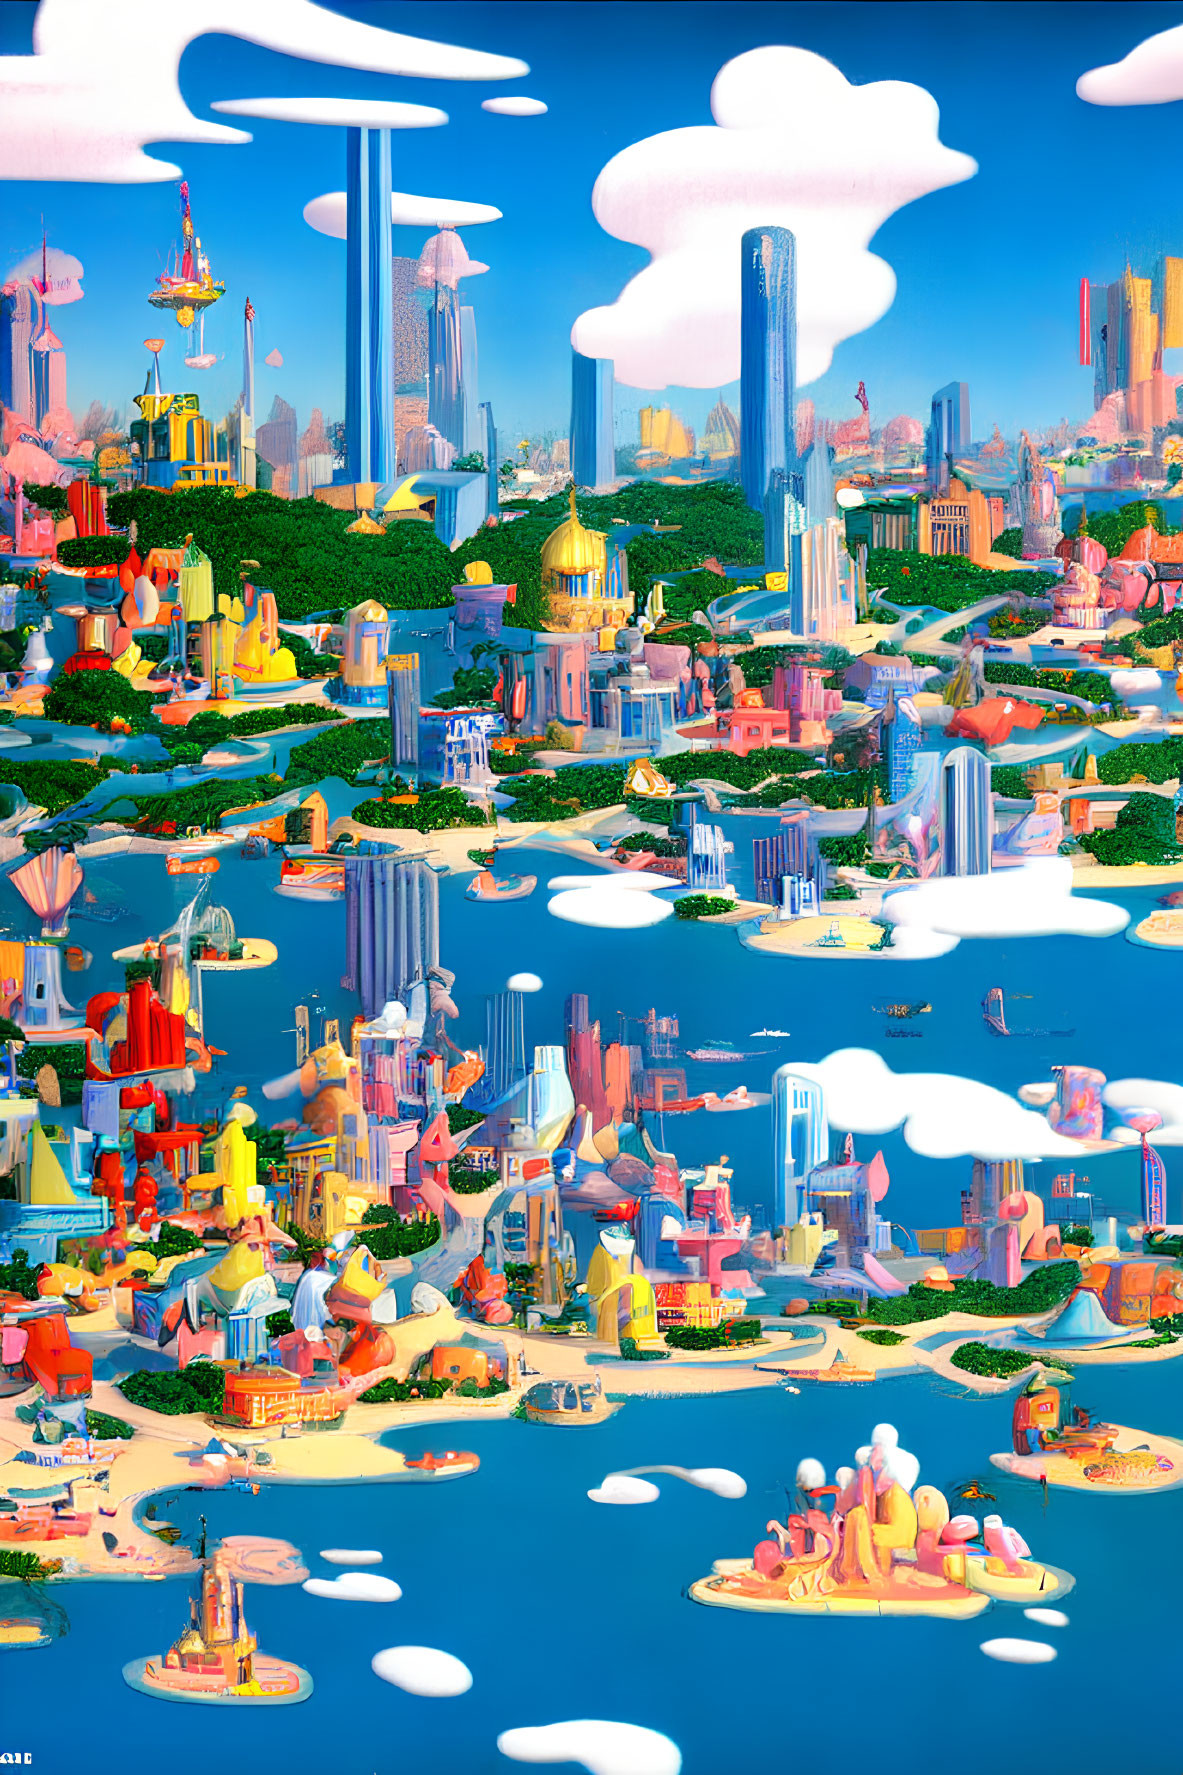 Whimsical cityscape with colorful architecture and floating clouds